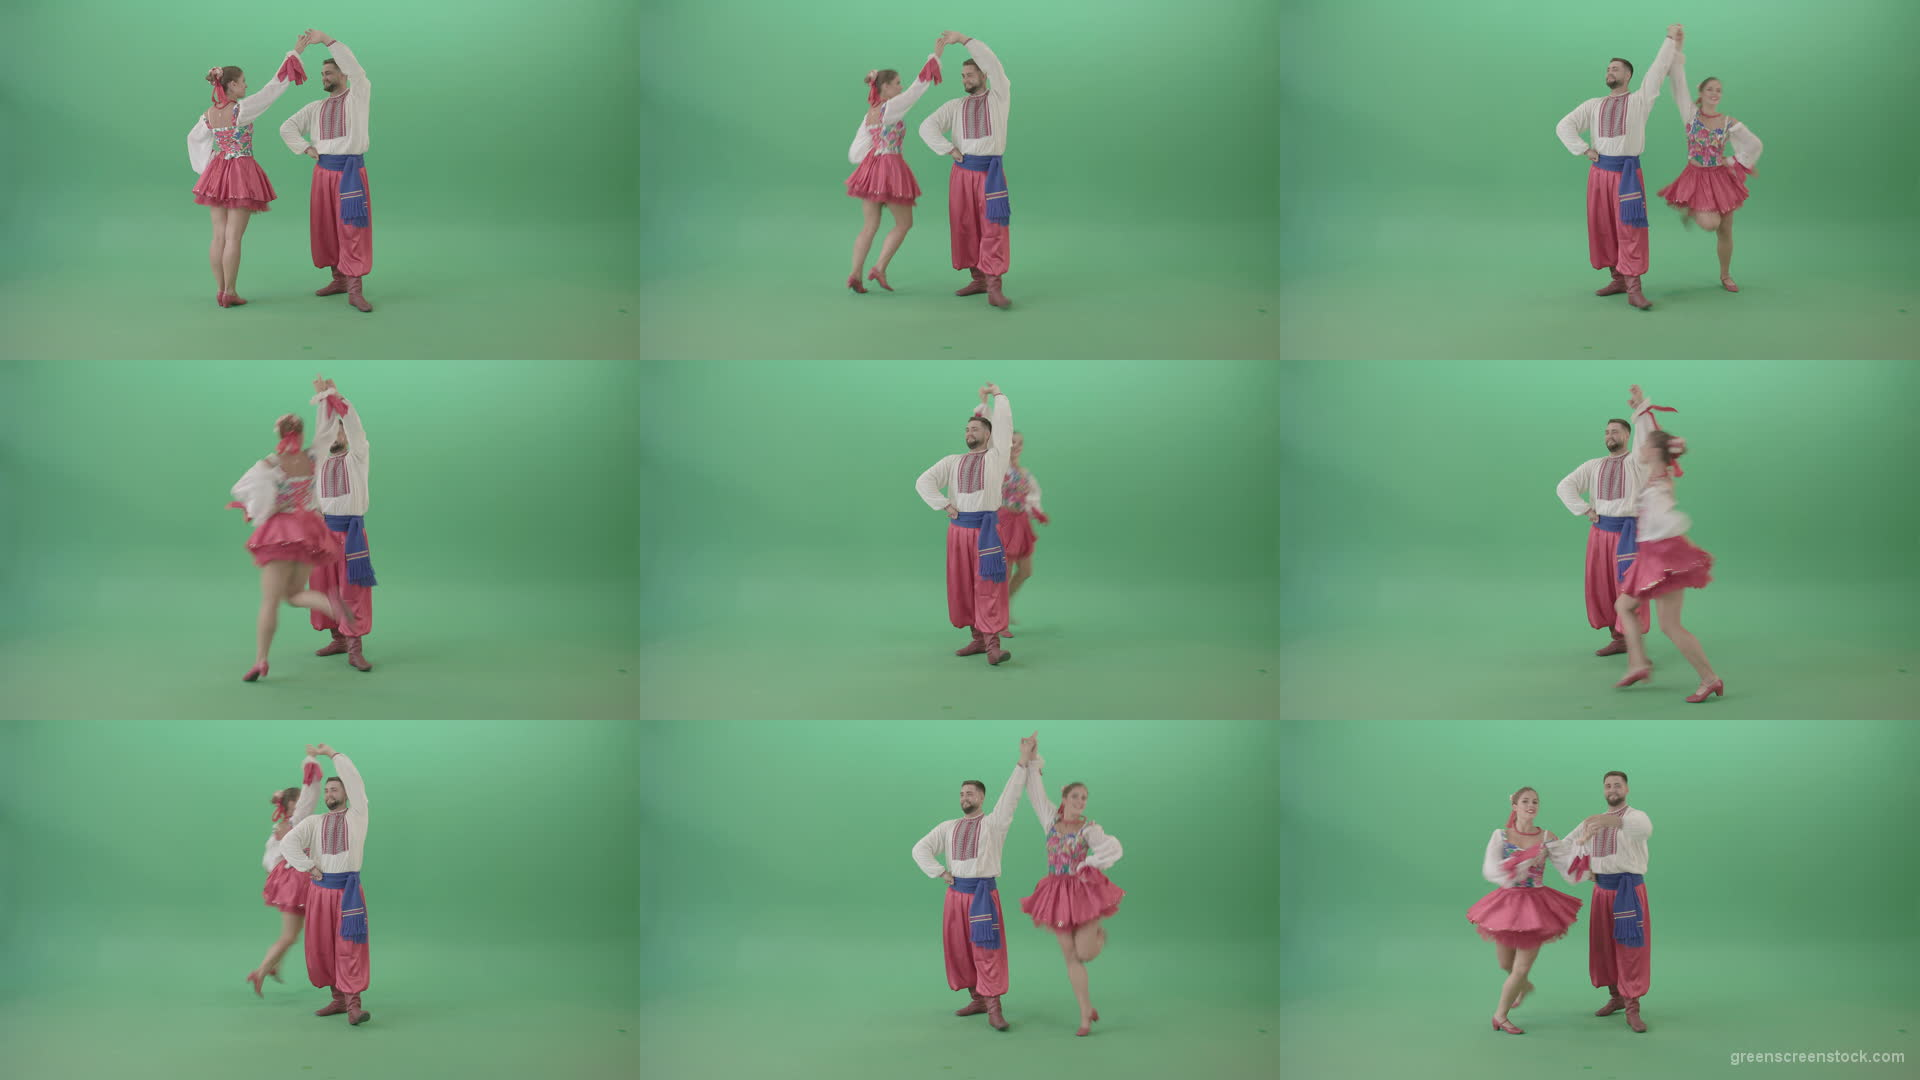 Folk-ethno-ukraine-dancing-boy-and-girl-isolated-on-green-screen-30-fps-4K-Video-Footage-1920 Green Screen Stock